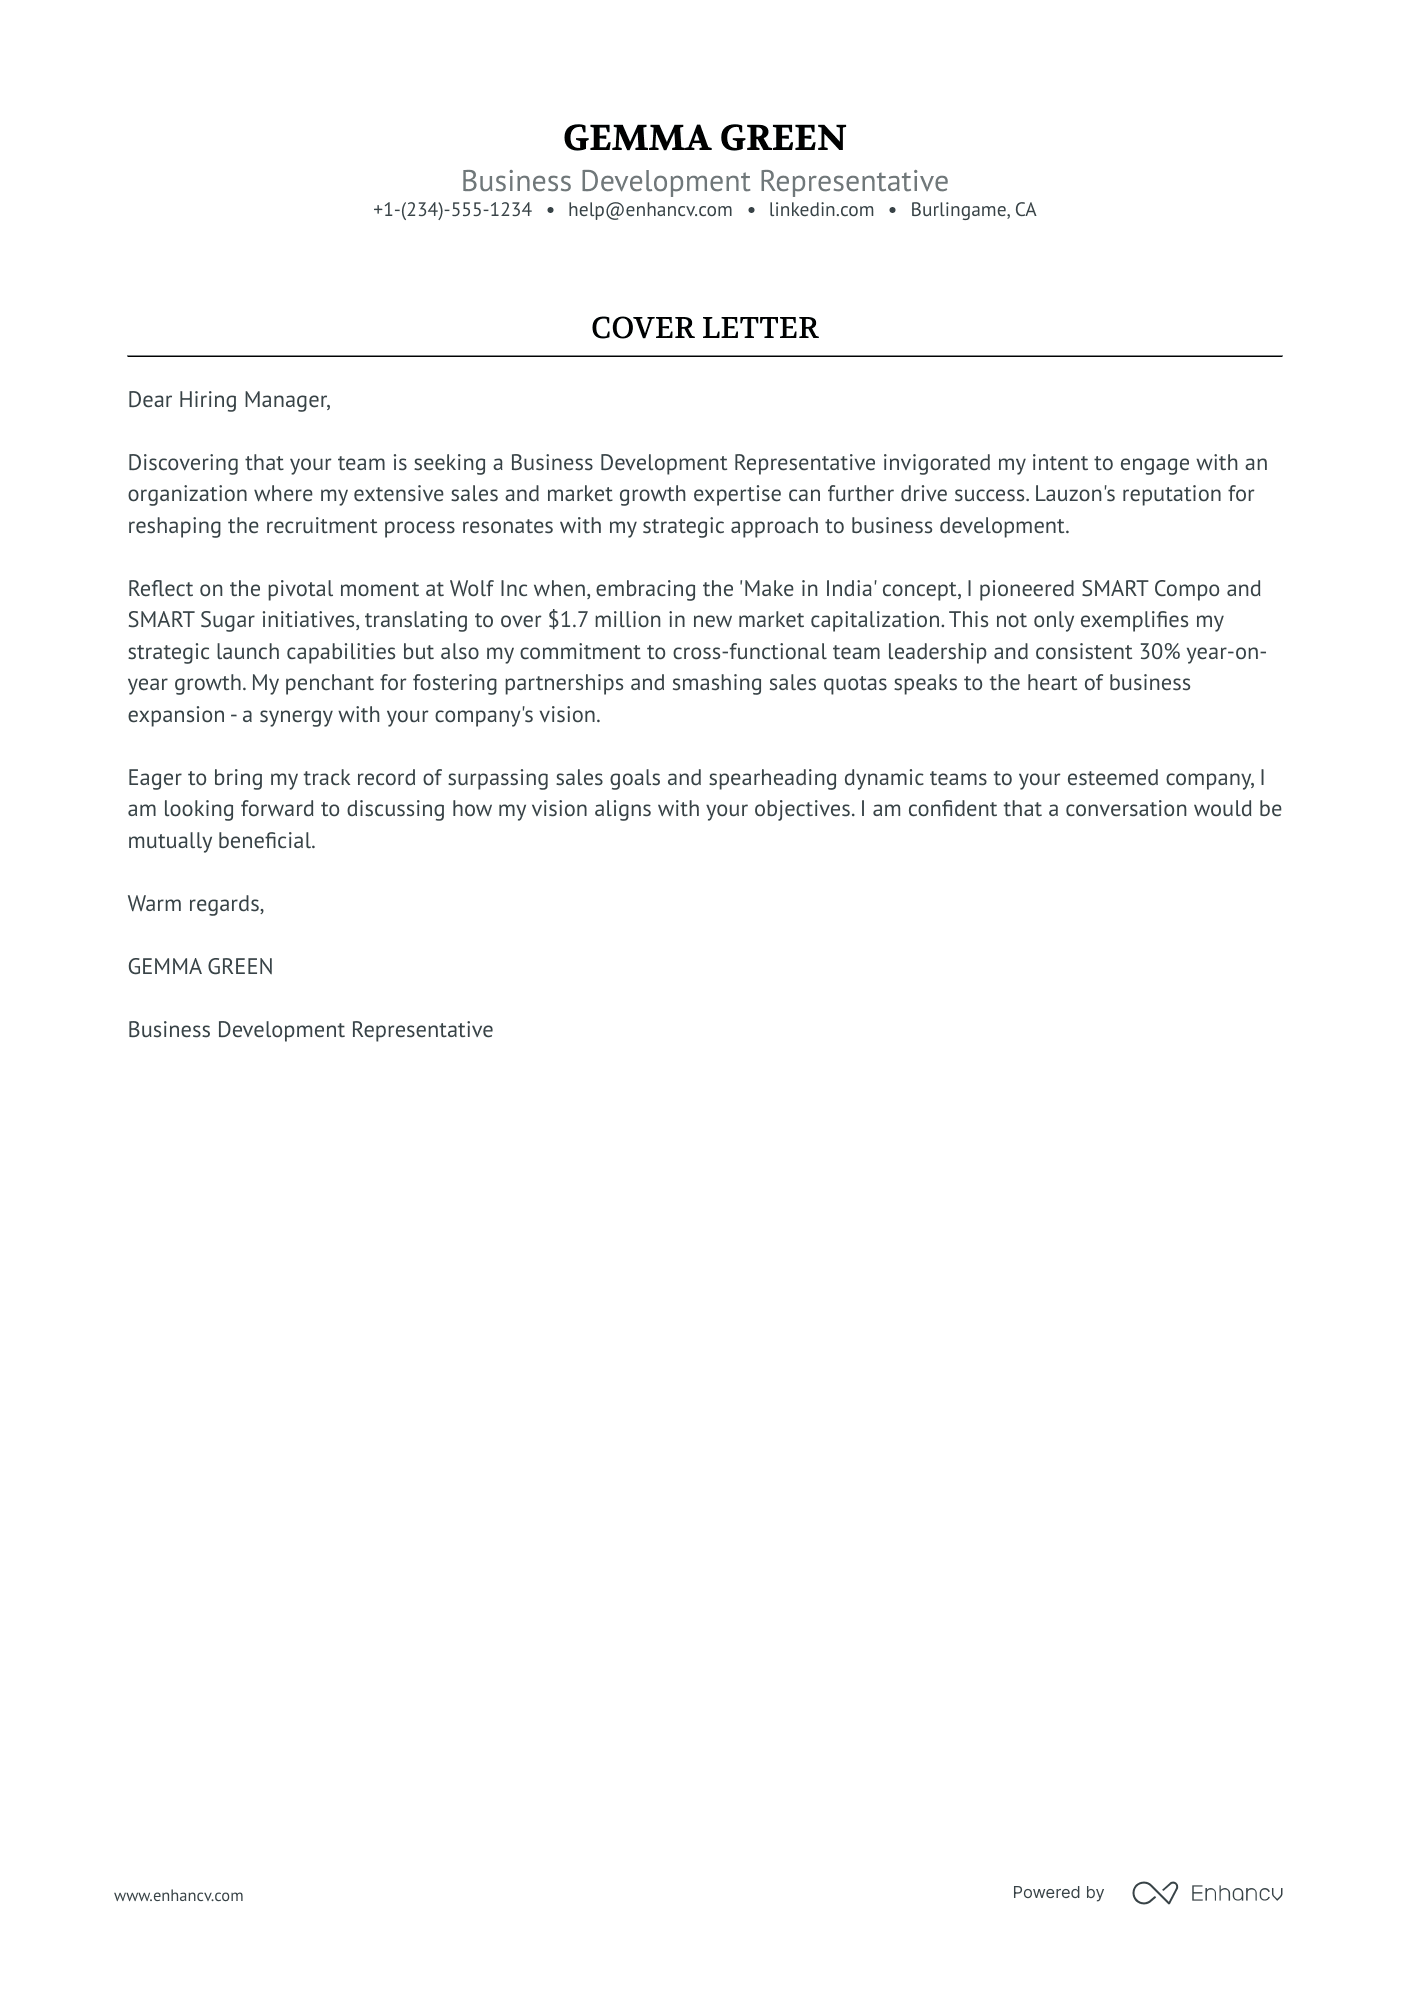 cover letter about business development